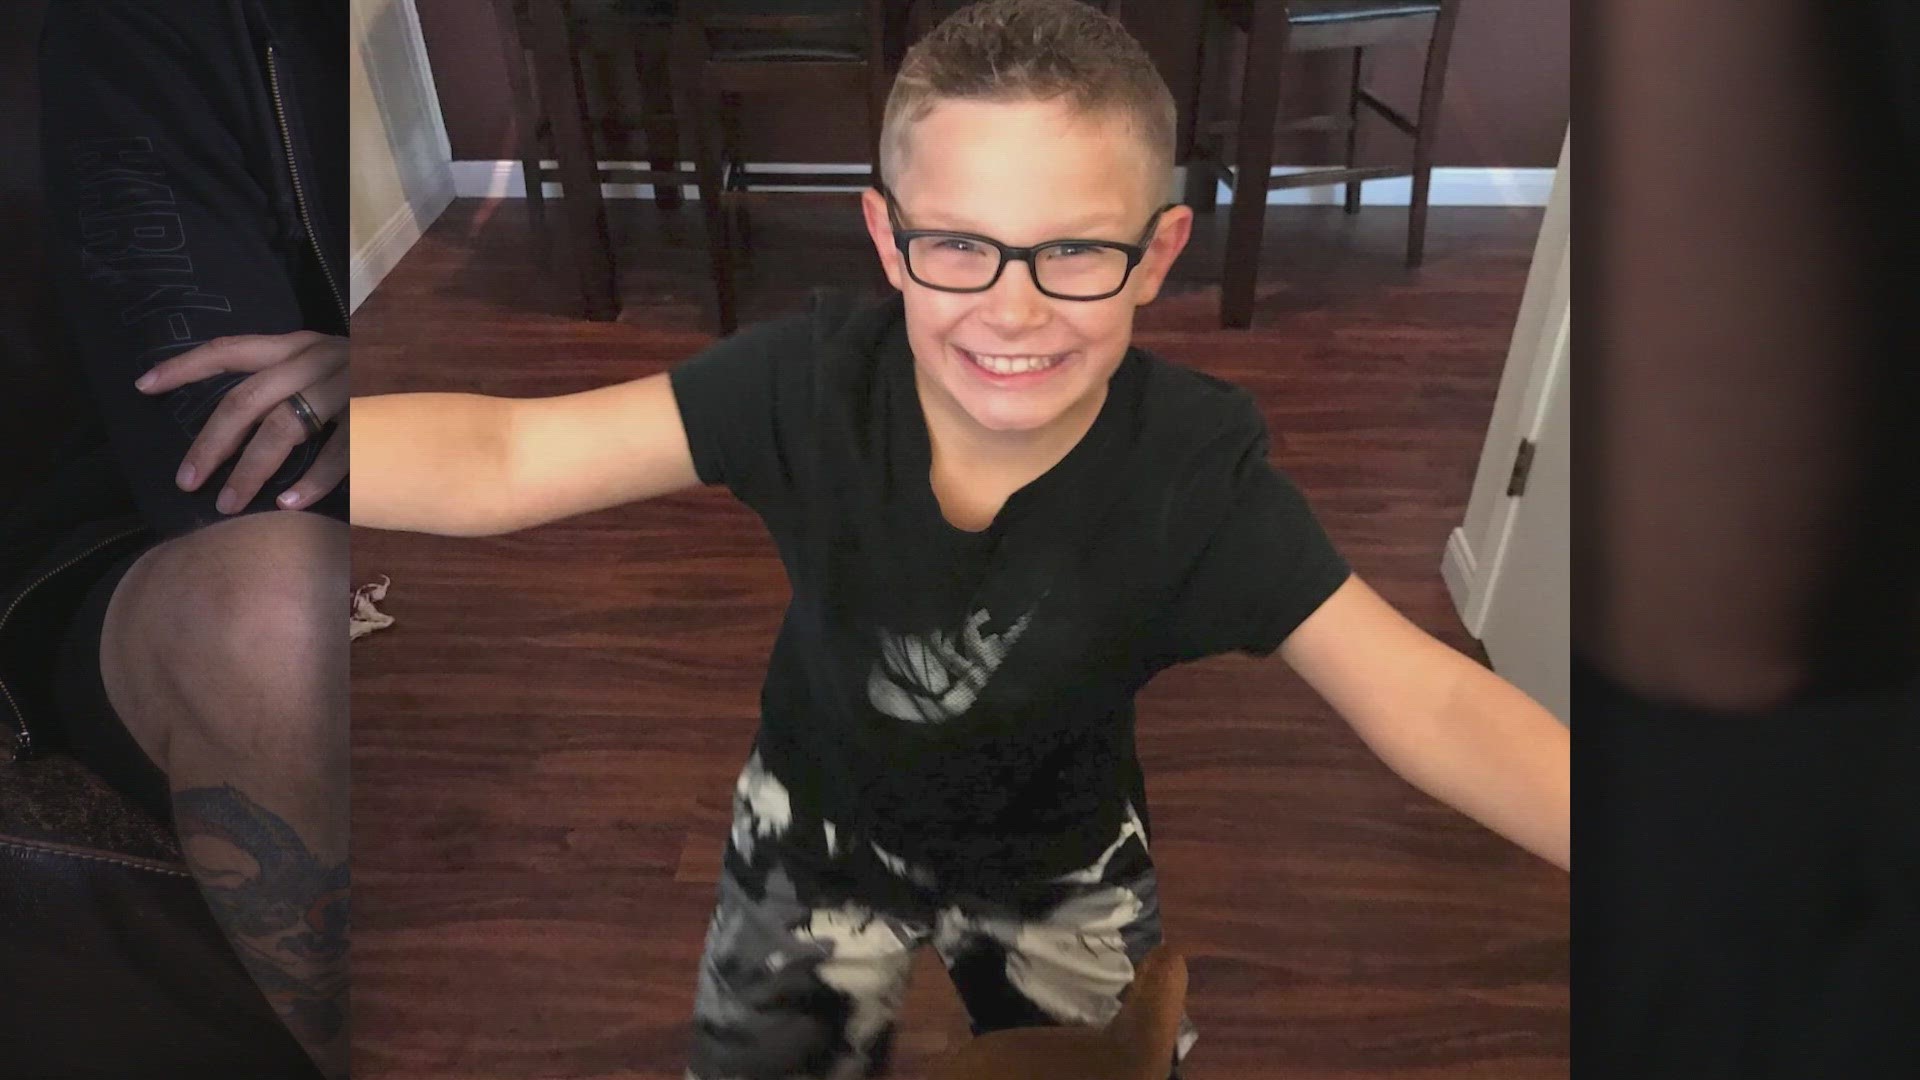 Gabriel Coury was killed on Tuesday when police say he was struck by a suspected drunk driver. Coury was coming home from the park when he was hit.